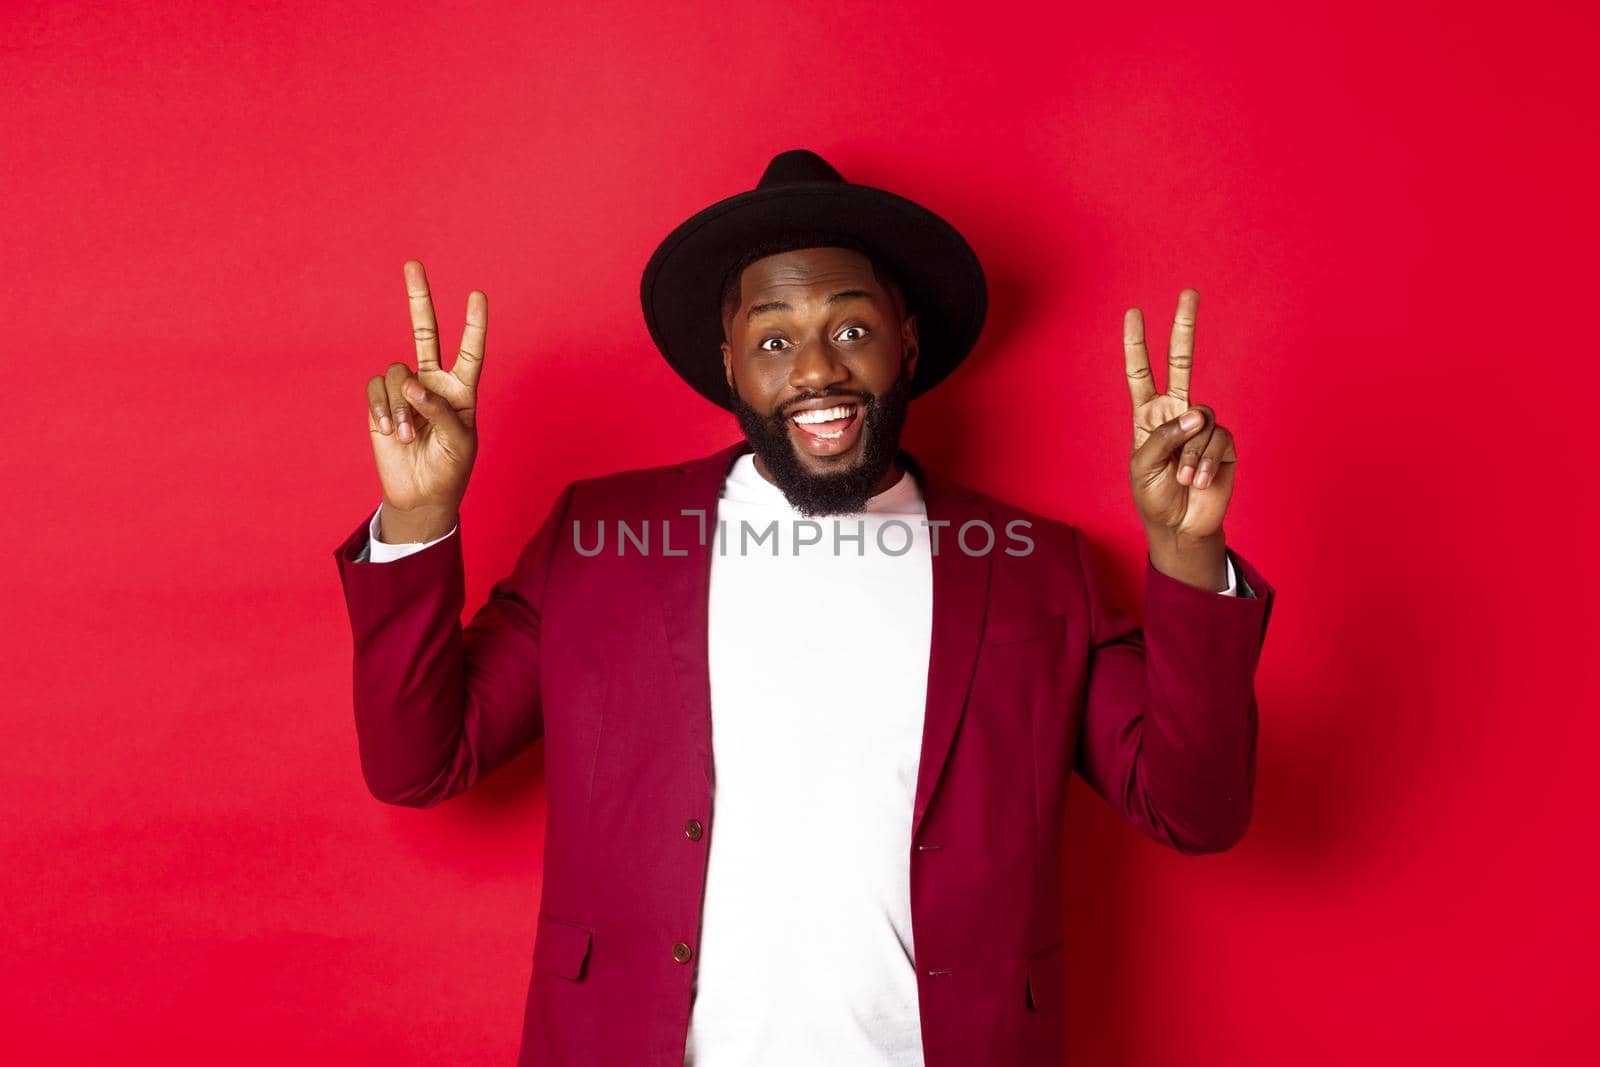 Fashion and party concept. Handsome Black man having fun, showing peace signs and smiling, standing in hat against red background by Benzoix